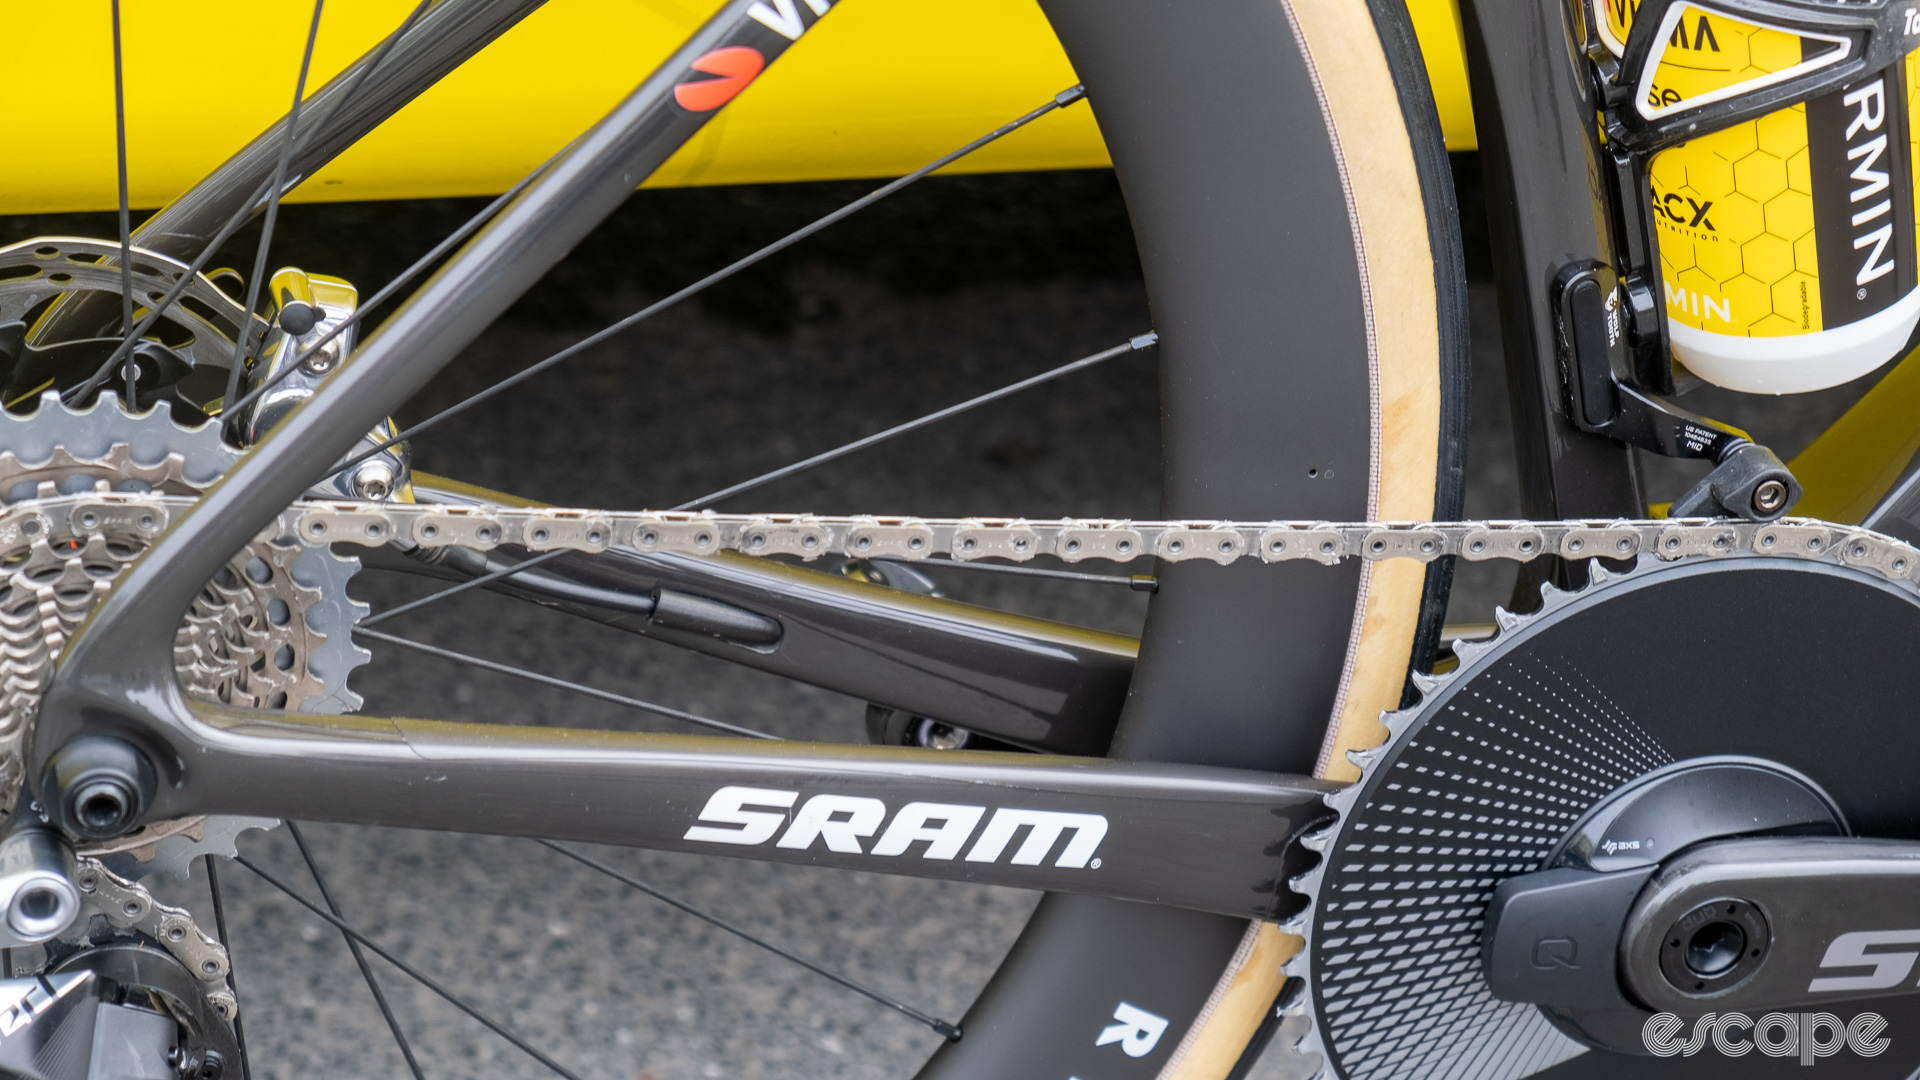 The image shows the chain on Marianne Vos' Cervelo Soloist.